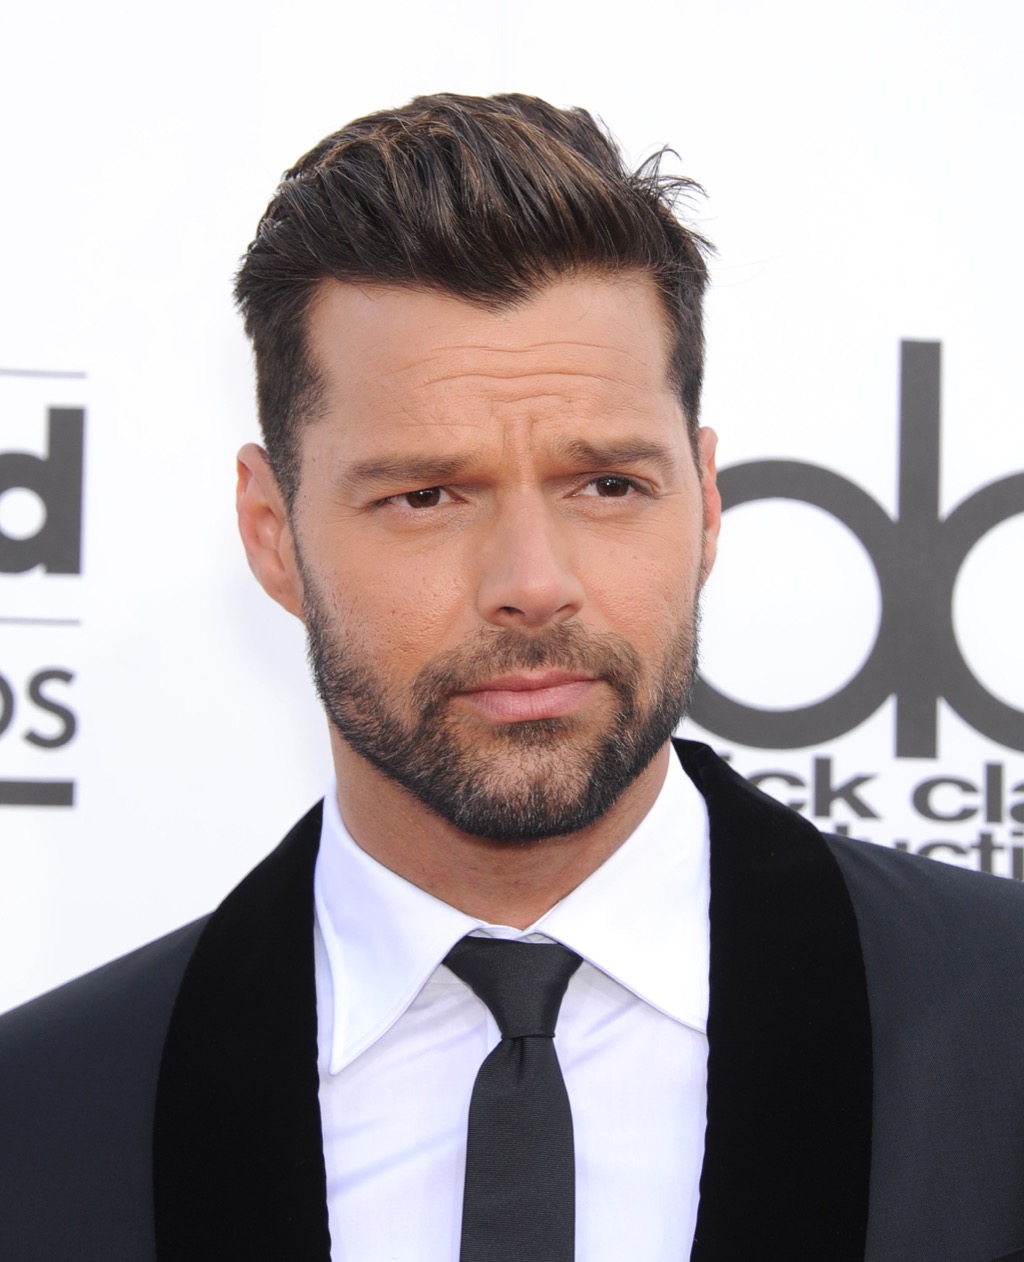 men's haircuts to look younger, starring Ricky Martin